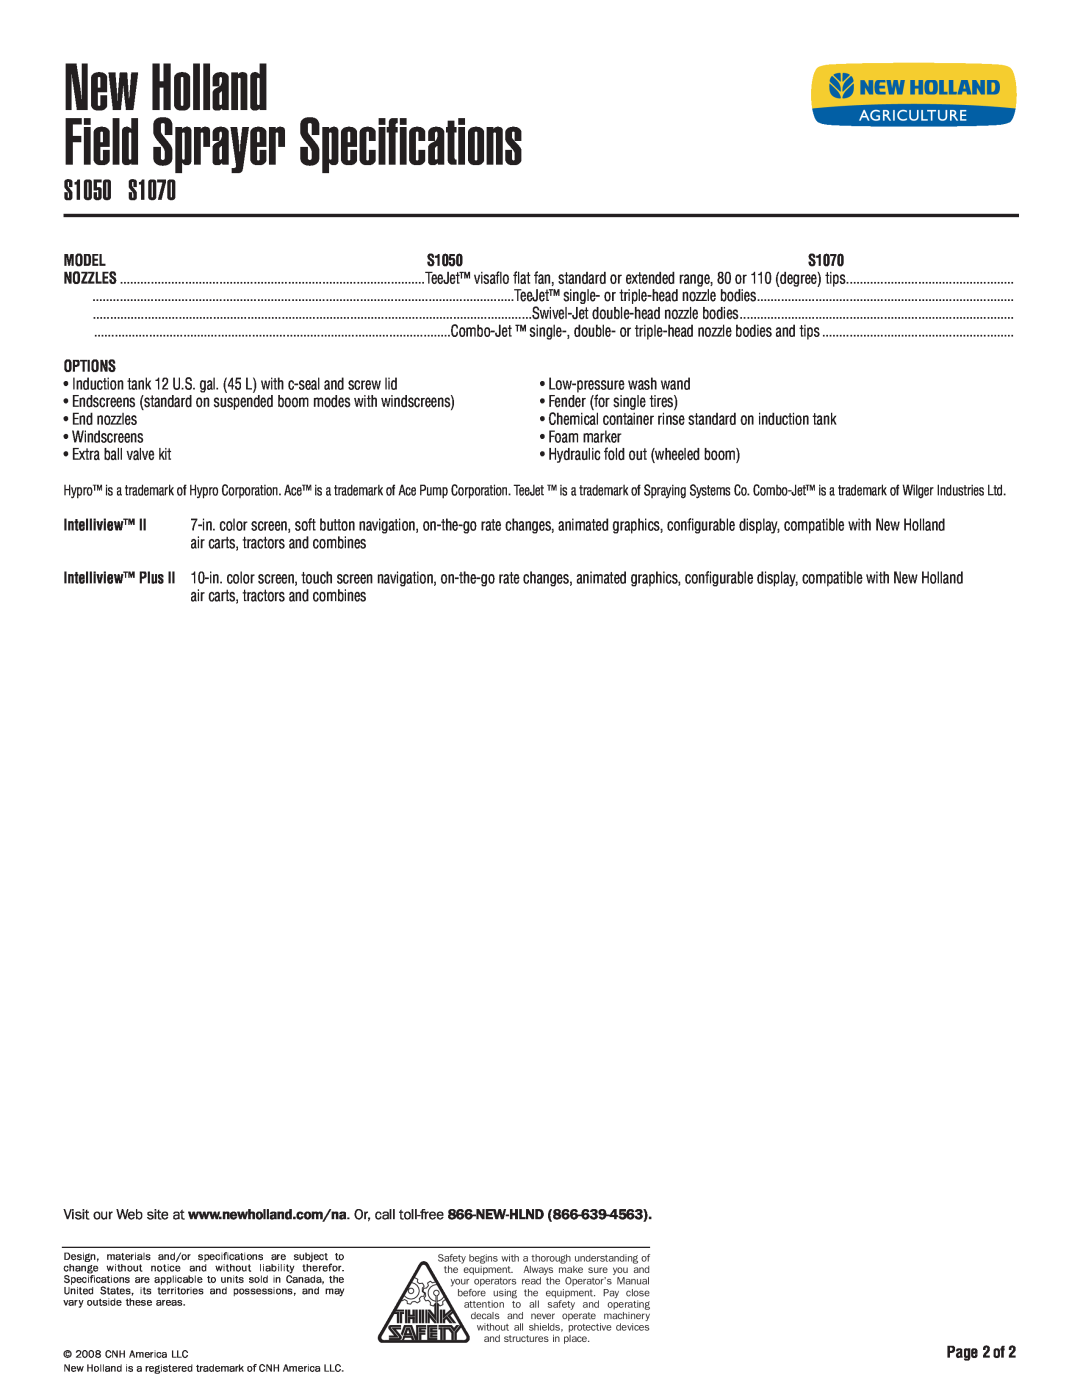 New Holland S1050 specifications S1070, Intelliview, Page 2of, New Holland Field Sprayer Specifications, Model 